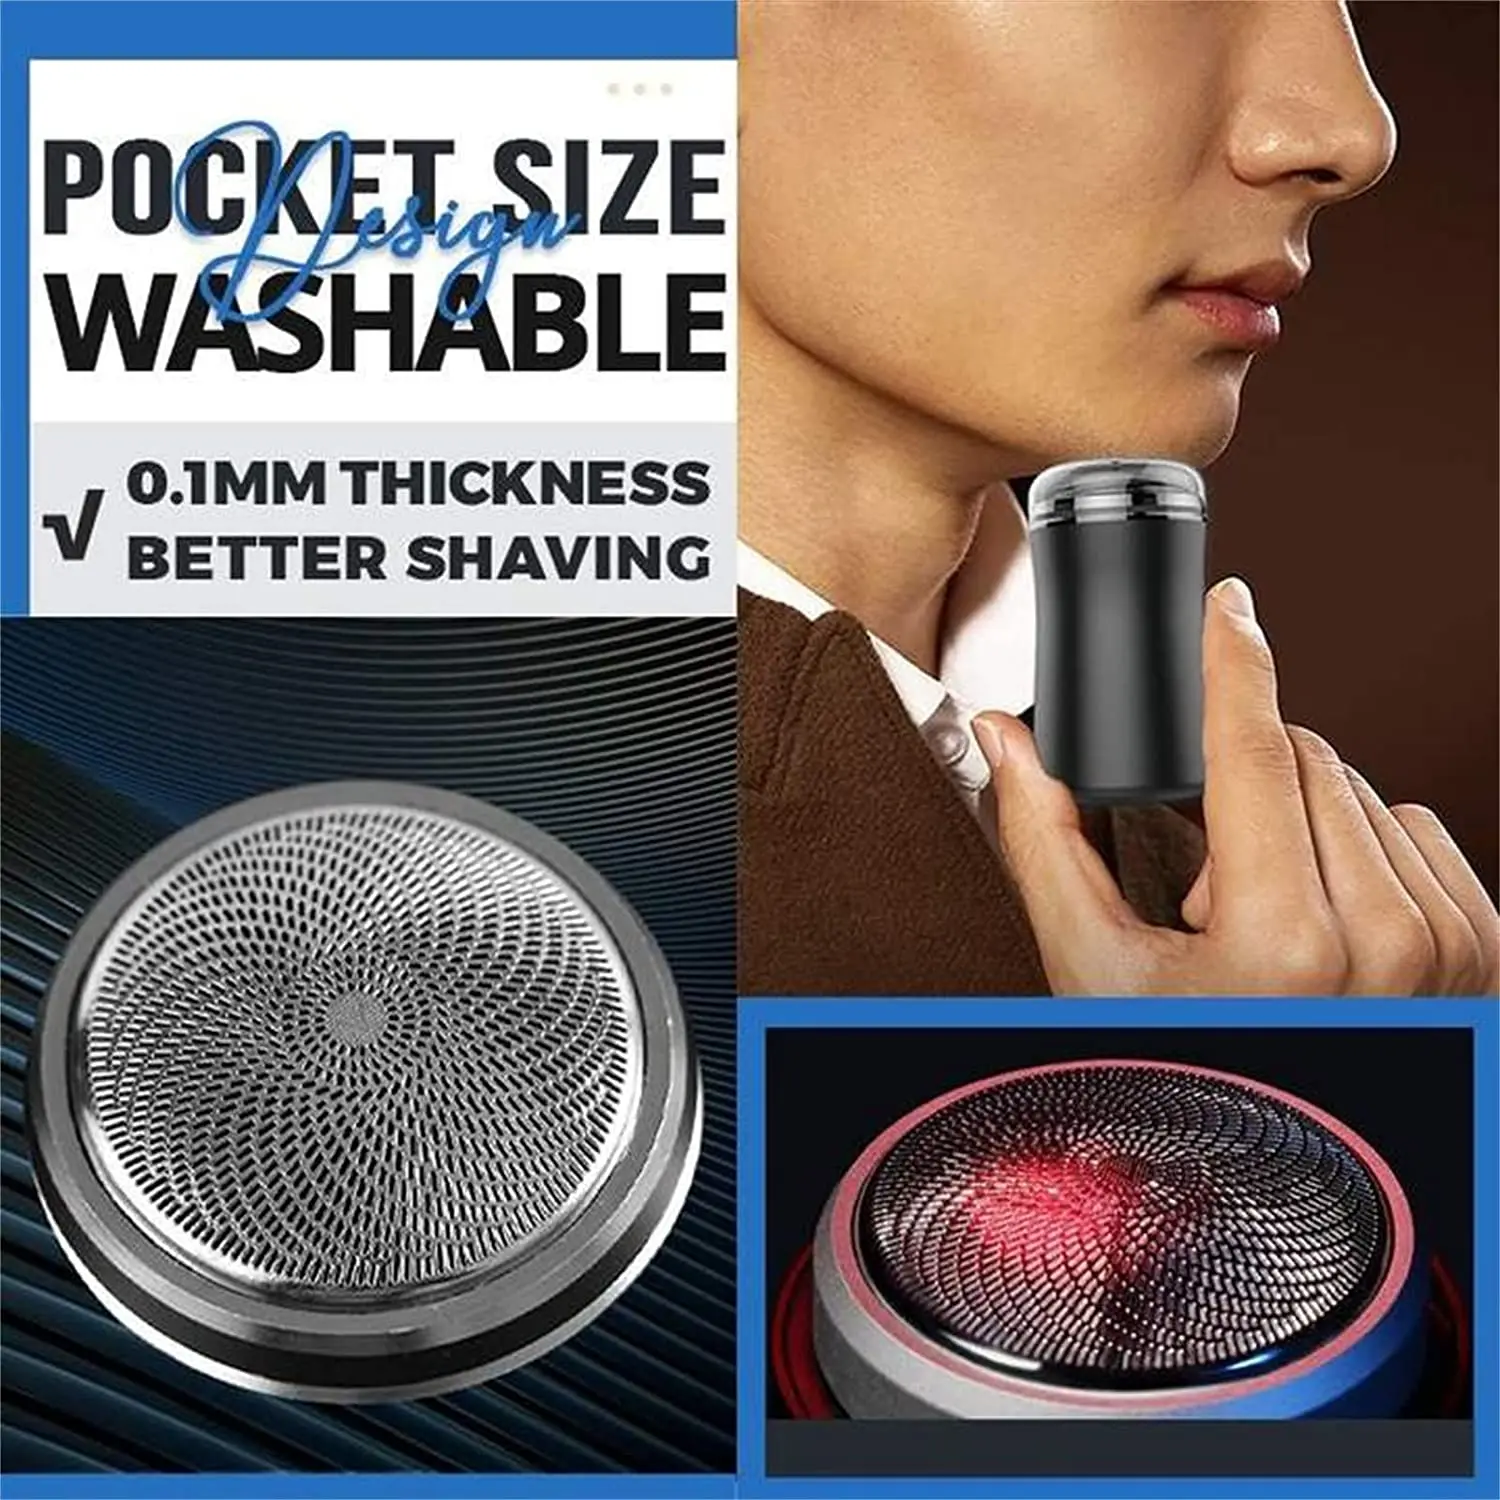 Pocket Size Washable Electric Razor Rechargeable Waterproof Razor Mini Portable Shaver Trimmer Gift for Boyfriend Husband Father